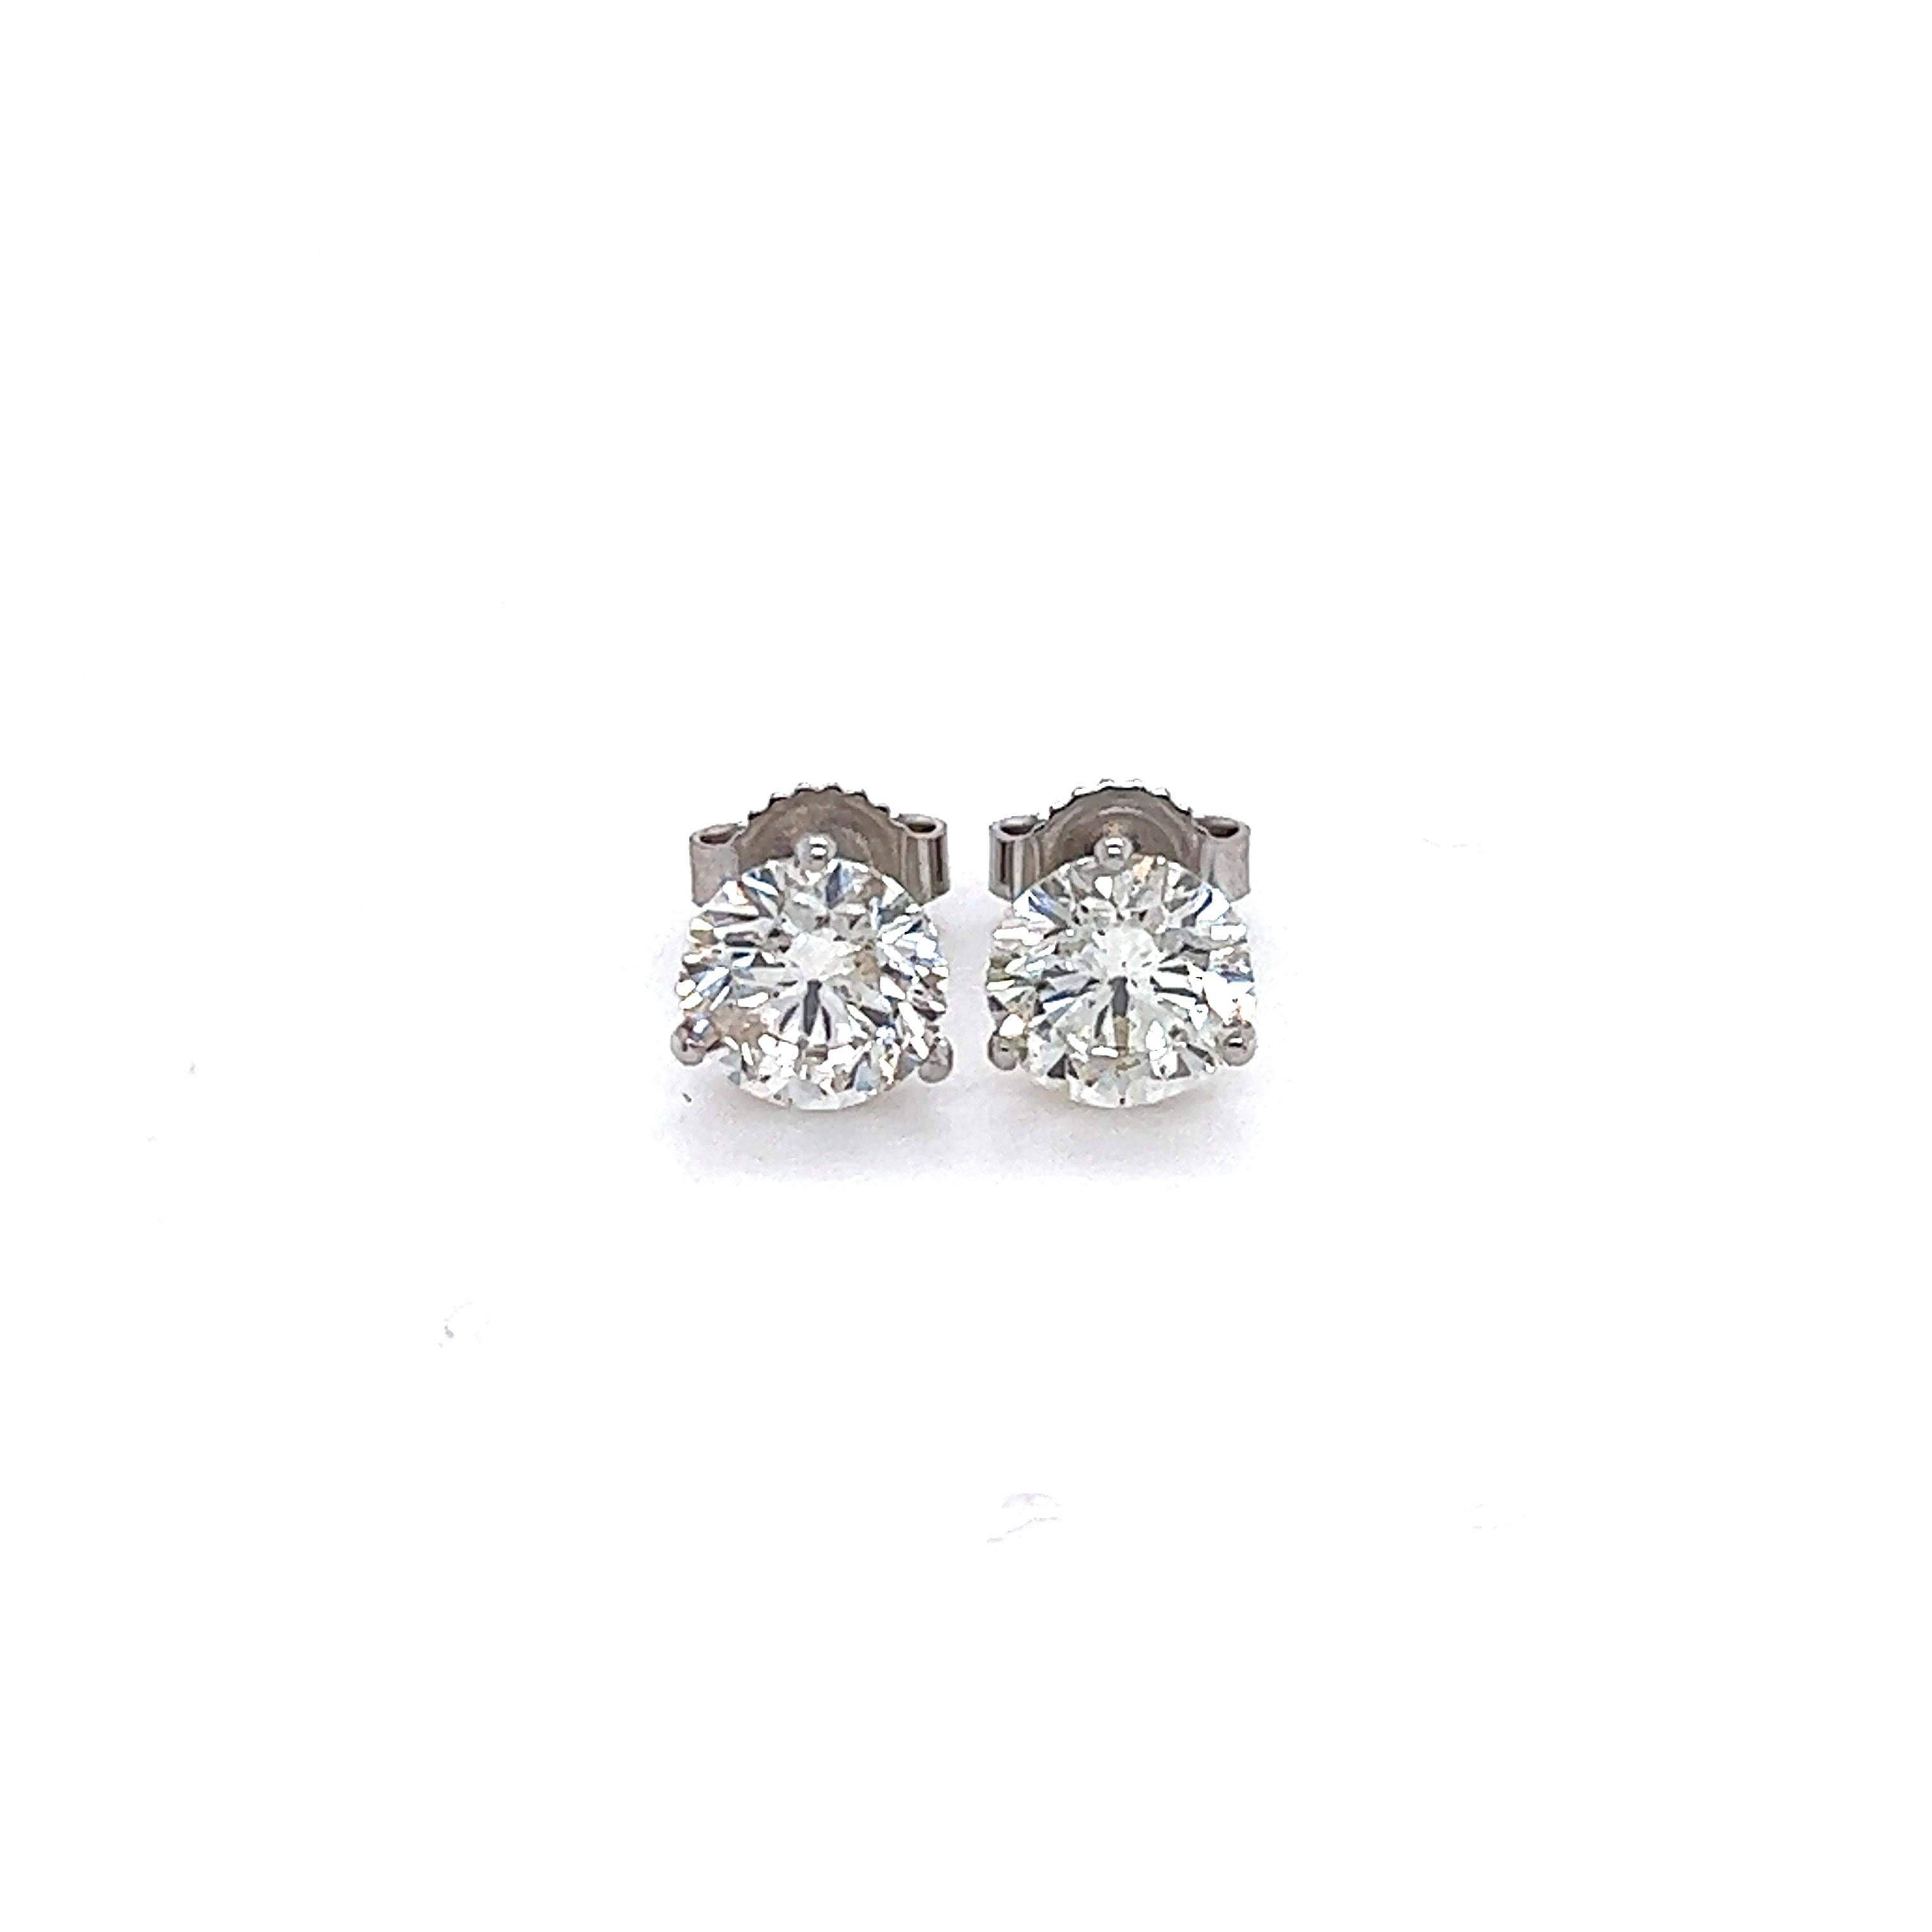 Round Cut 2.03 Ct Round Diamond Solitaire Stud Earring in 14k White Gold For Sale